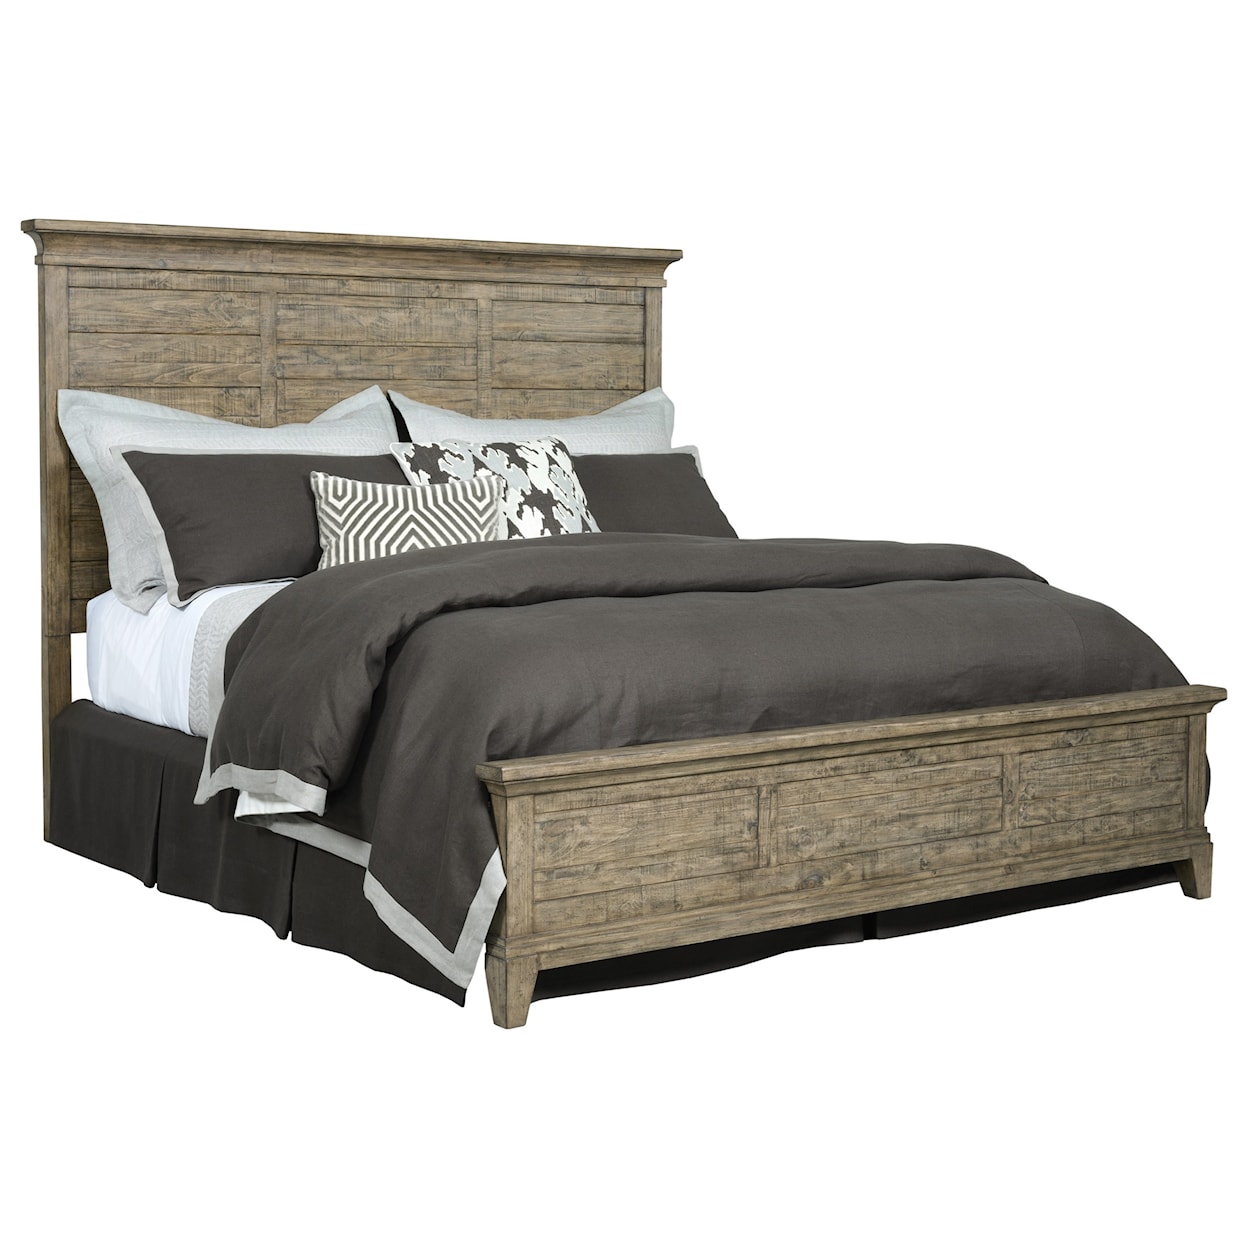 Kincaid Furniture Pike Place Jessup Panel Queen Bed       